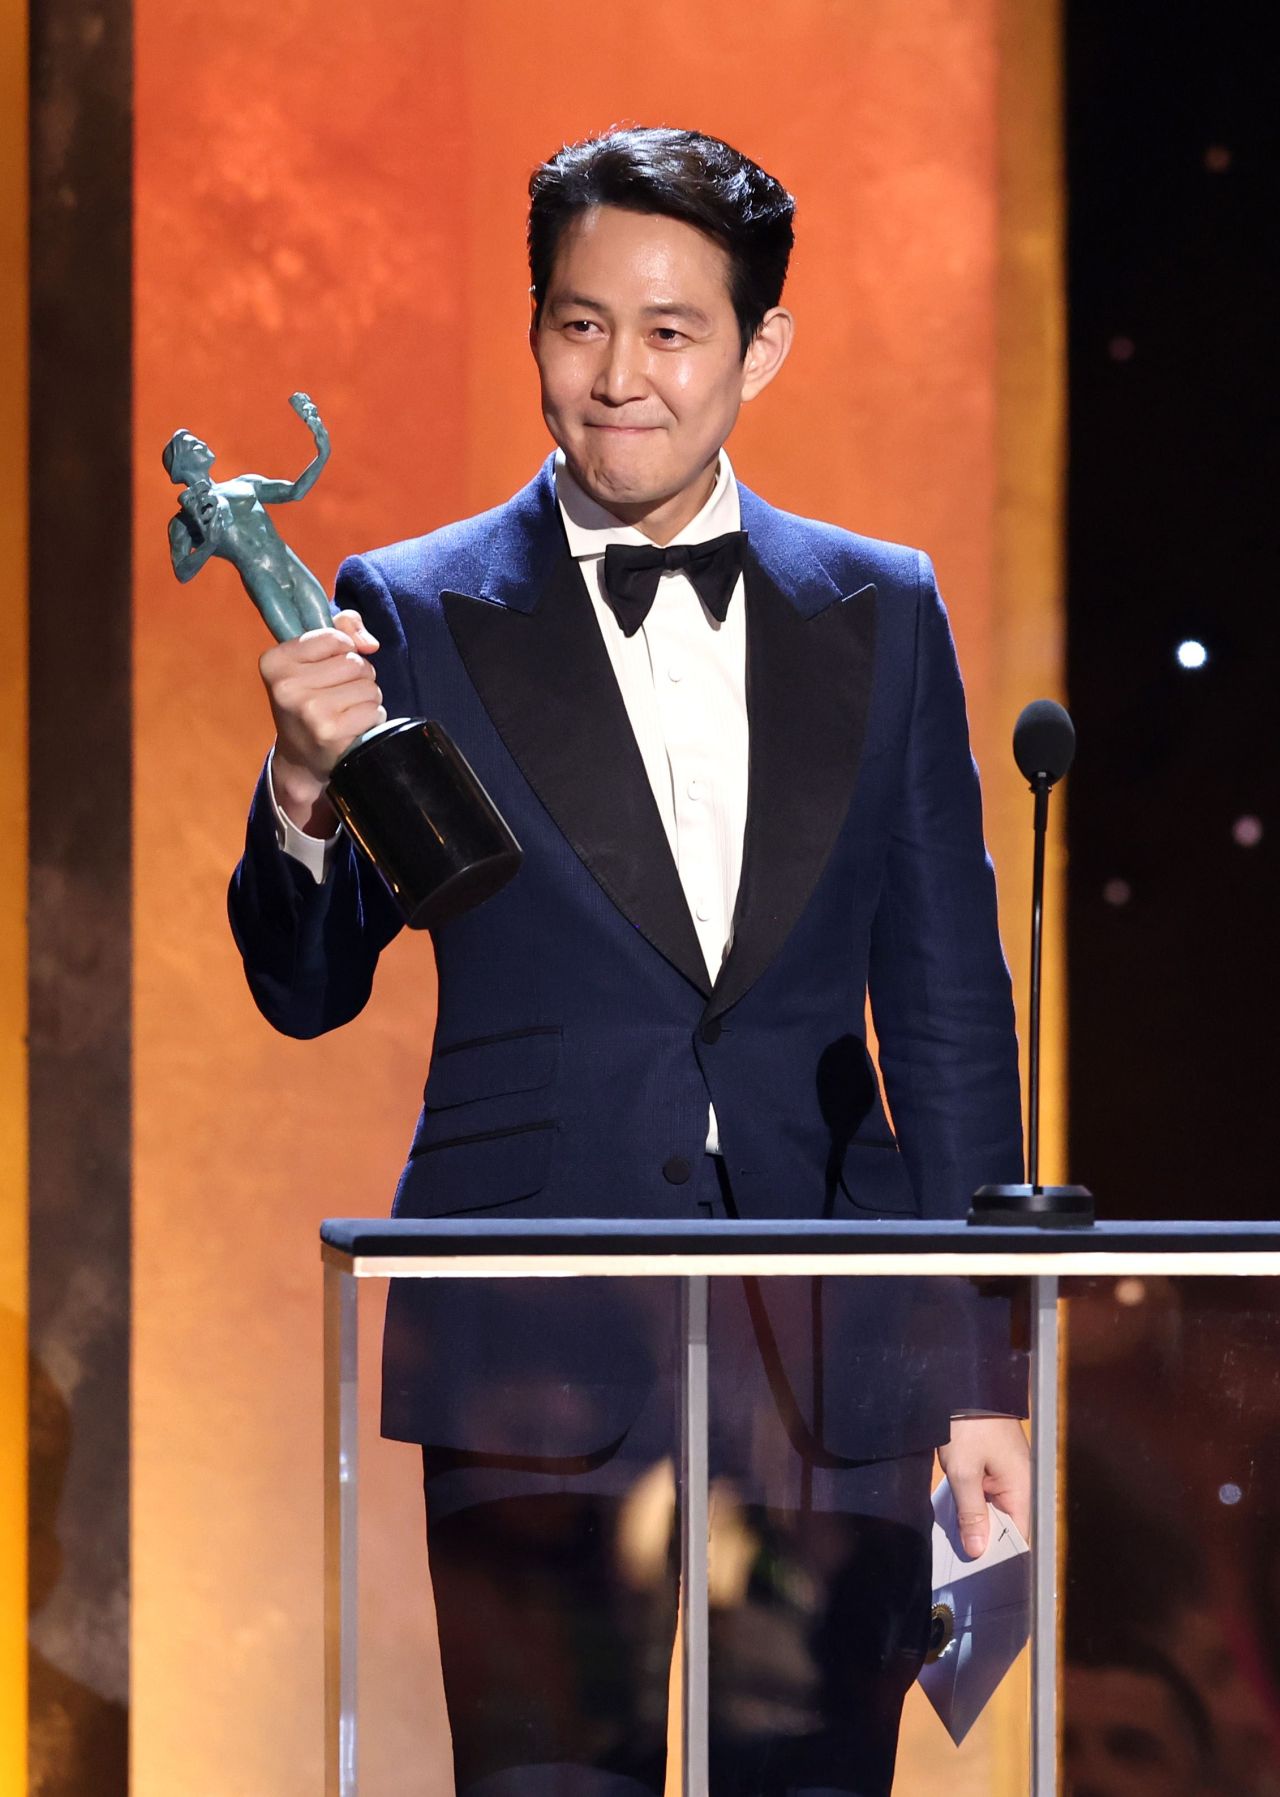 Lee Jung-jae accepts the outstanding performance by a male actor in a drama series trophy for his role in “Squid Game” during the 28th Annual Screen Actors Guild Awards at Barker Hangar on Sunday in Santa Monica, California (AFP-Yonhap)